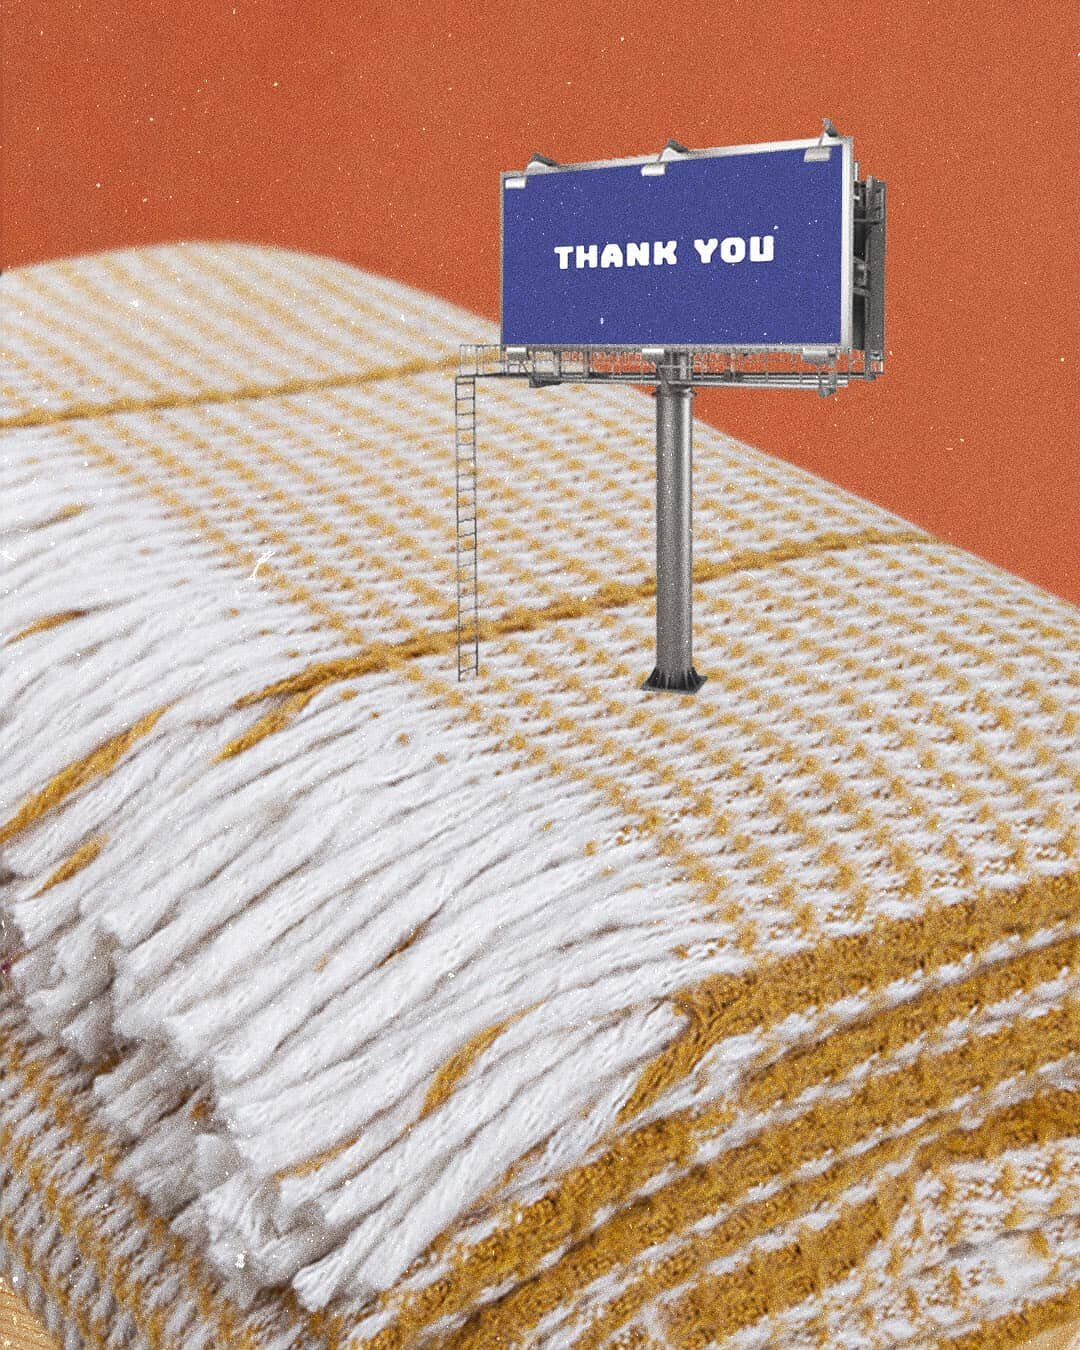 Thankful to all those who help keep our business alive and thriving. Wishing you a wonderful holiday filled with happiness and the warmth of a Sunday Afternoon blanket. 
.
.
.
.
.
.
.
.
.
.
.
.
.
.
.
.
.
.
#hometextile #blanket #waffleblanket #homede